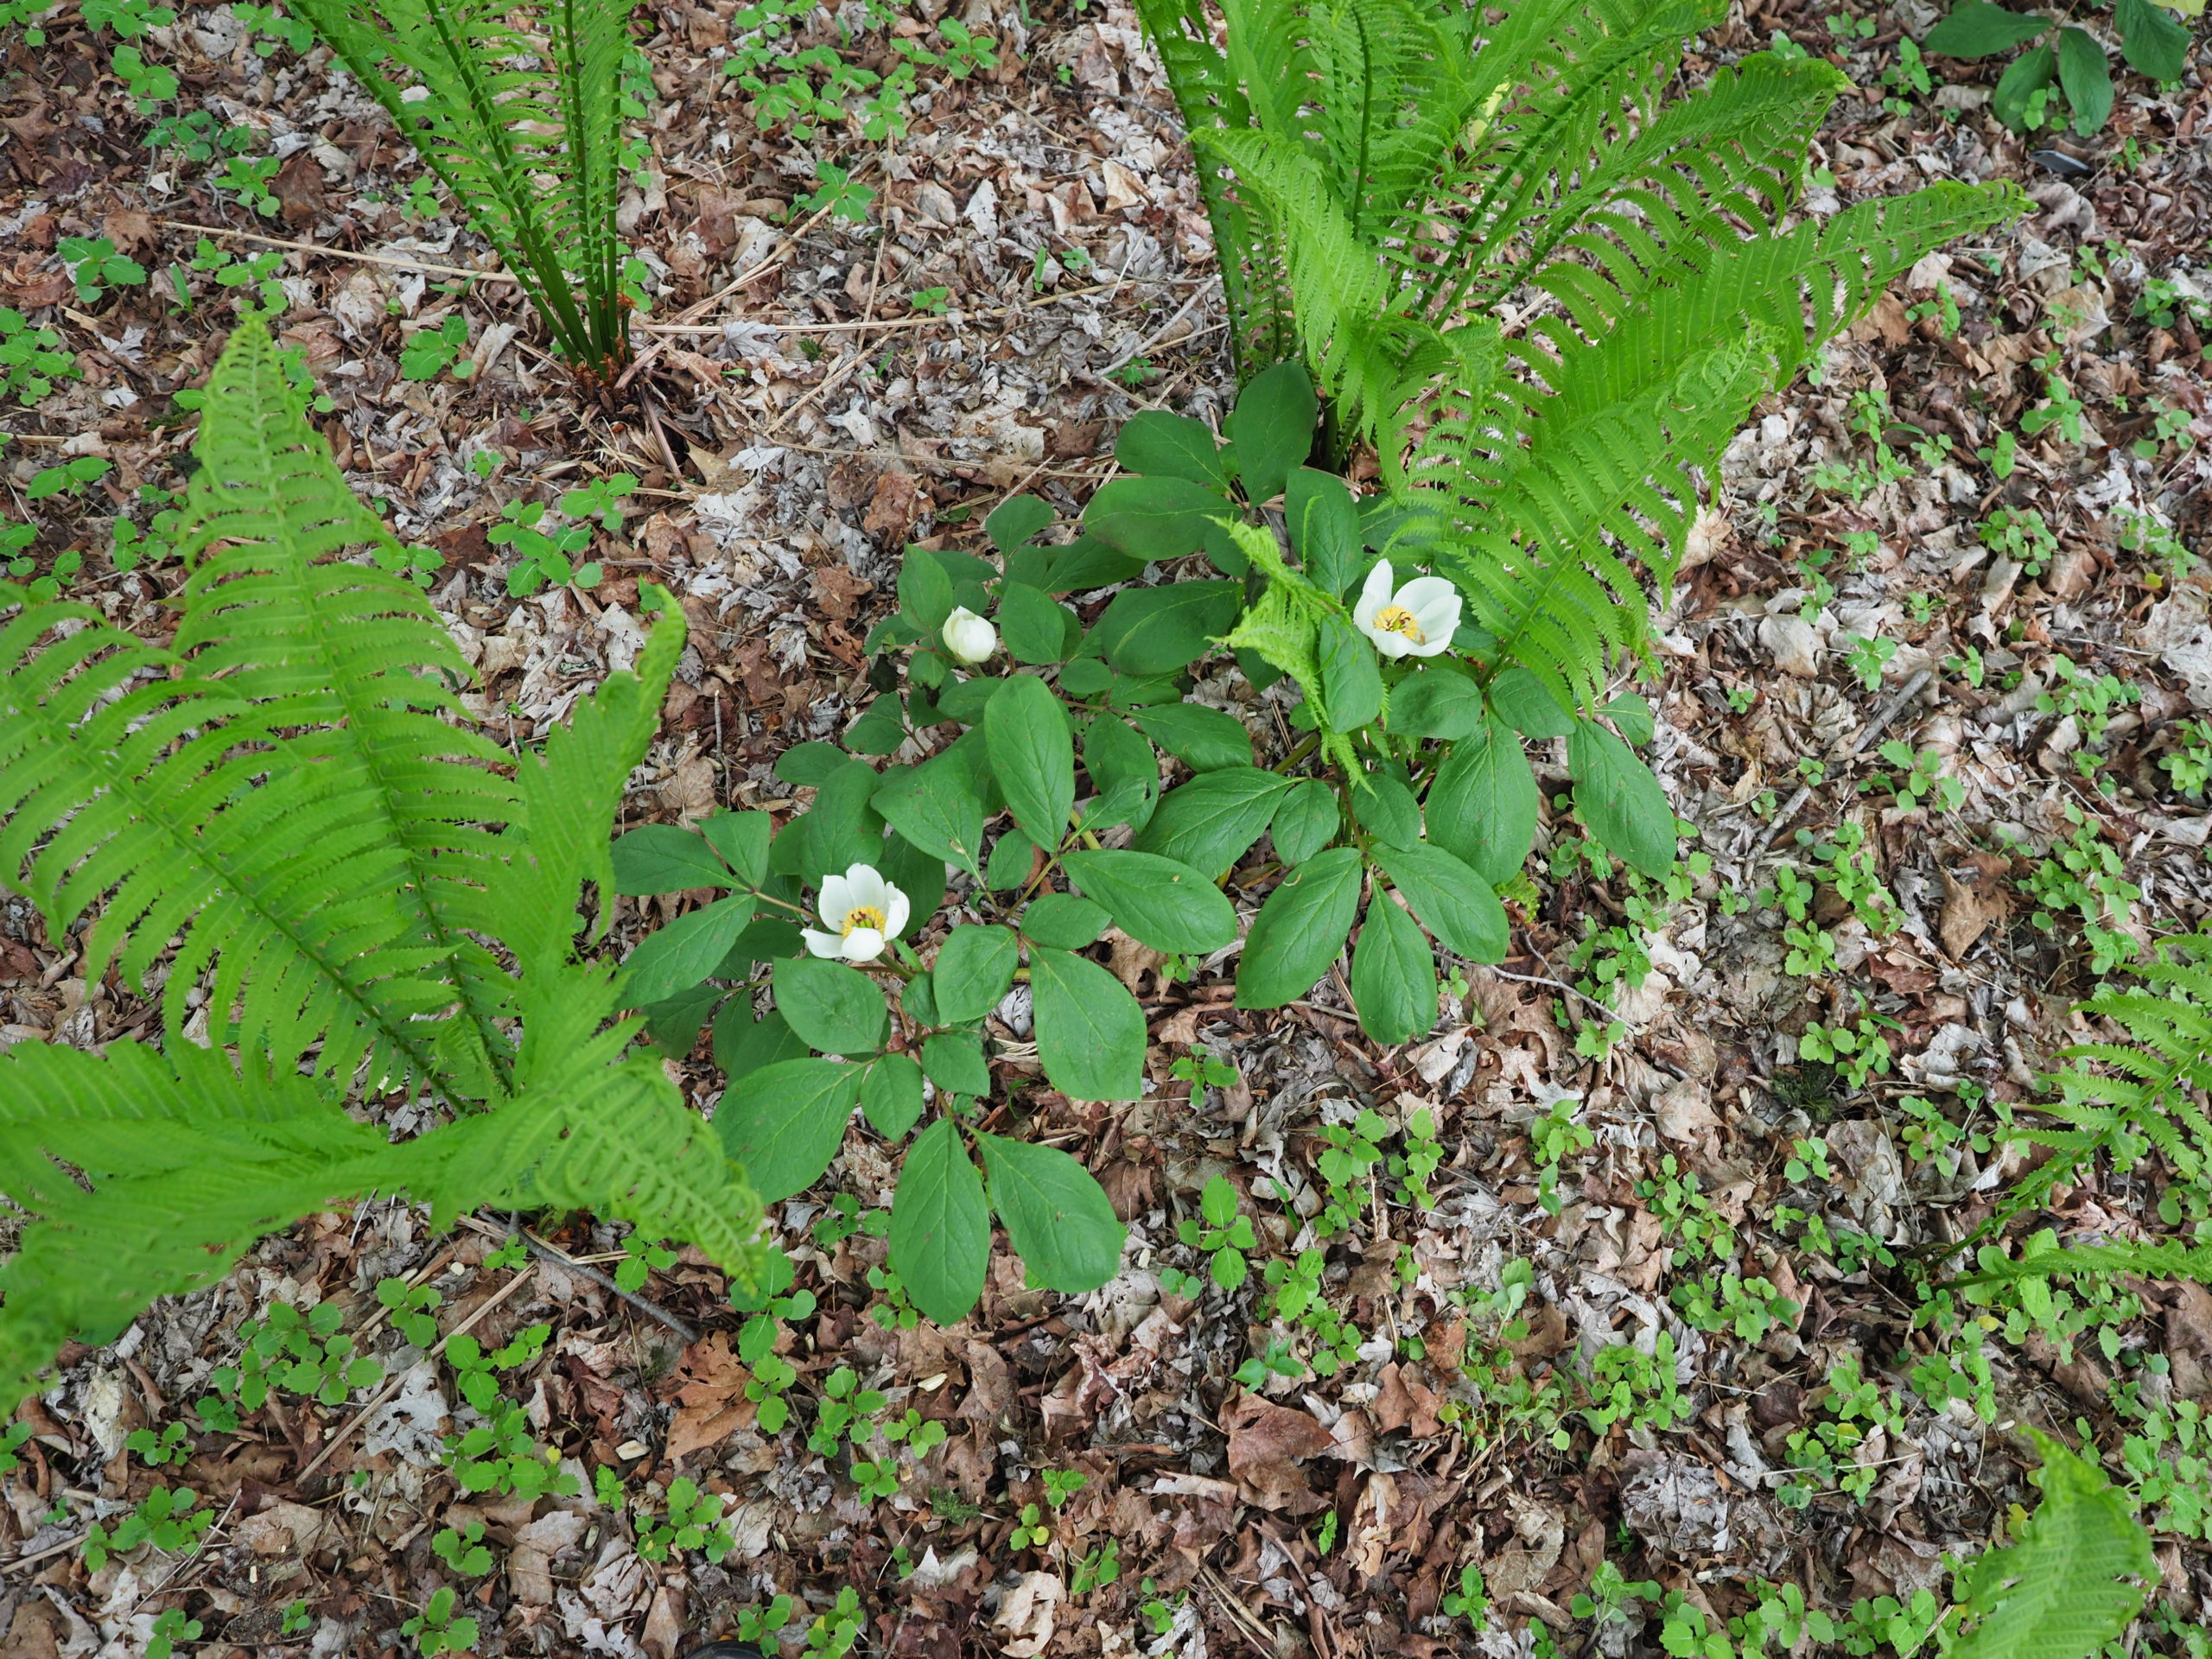 A pair of Japanese woodland peonies flowering among some ostrich ferns.  The flowers are about 3 inches across with white cups and burgundy centers and yellow stamens.